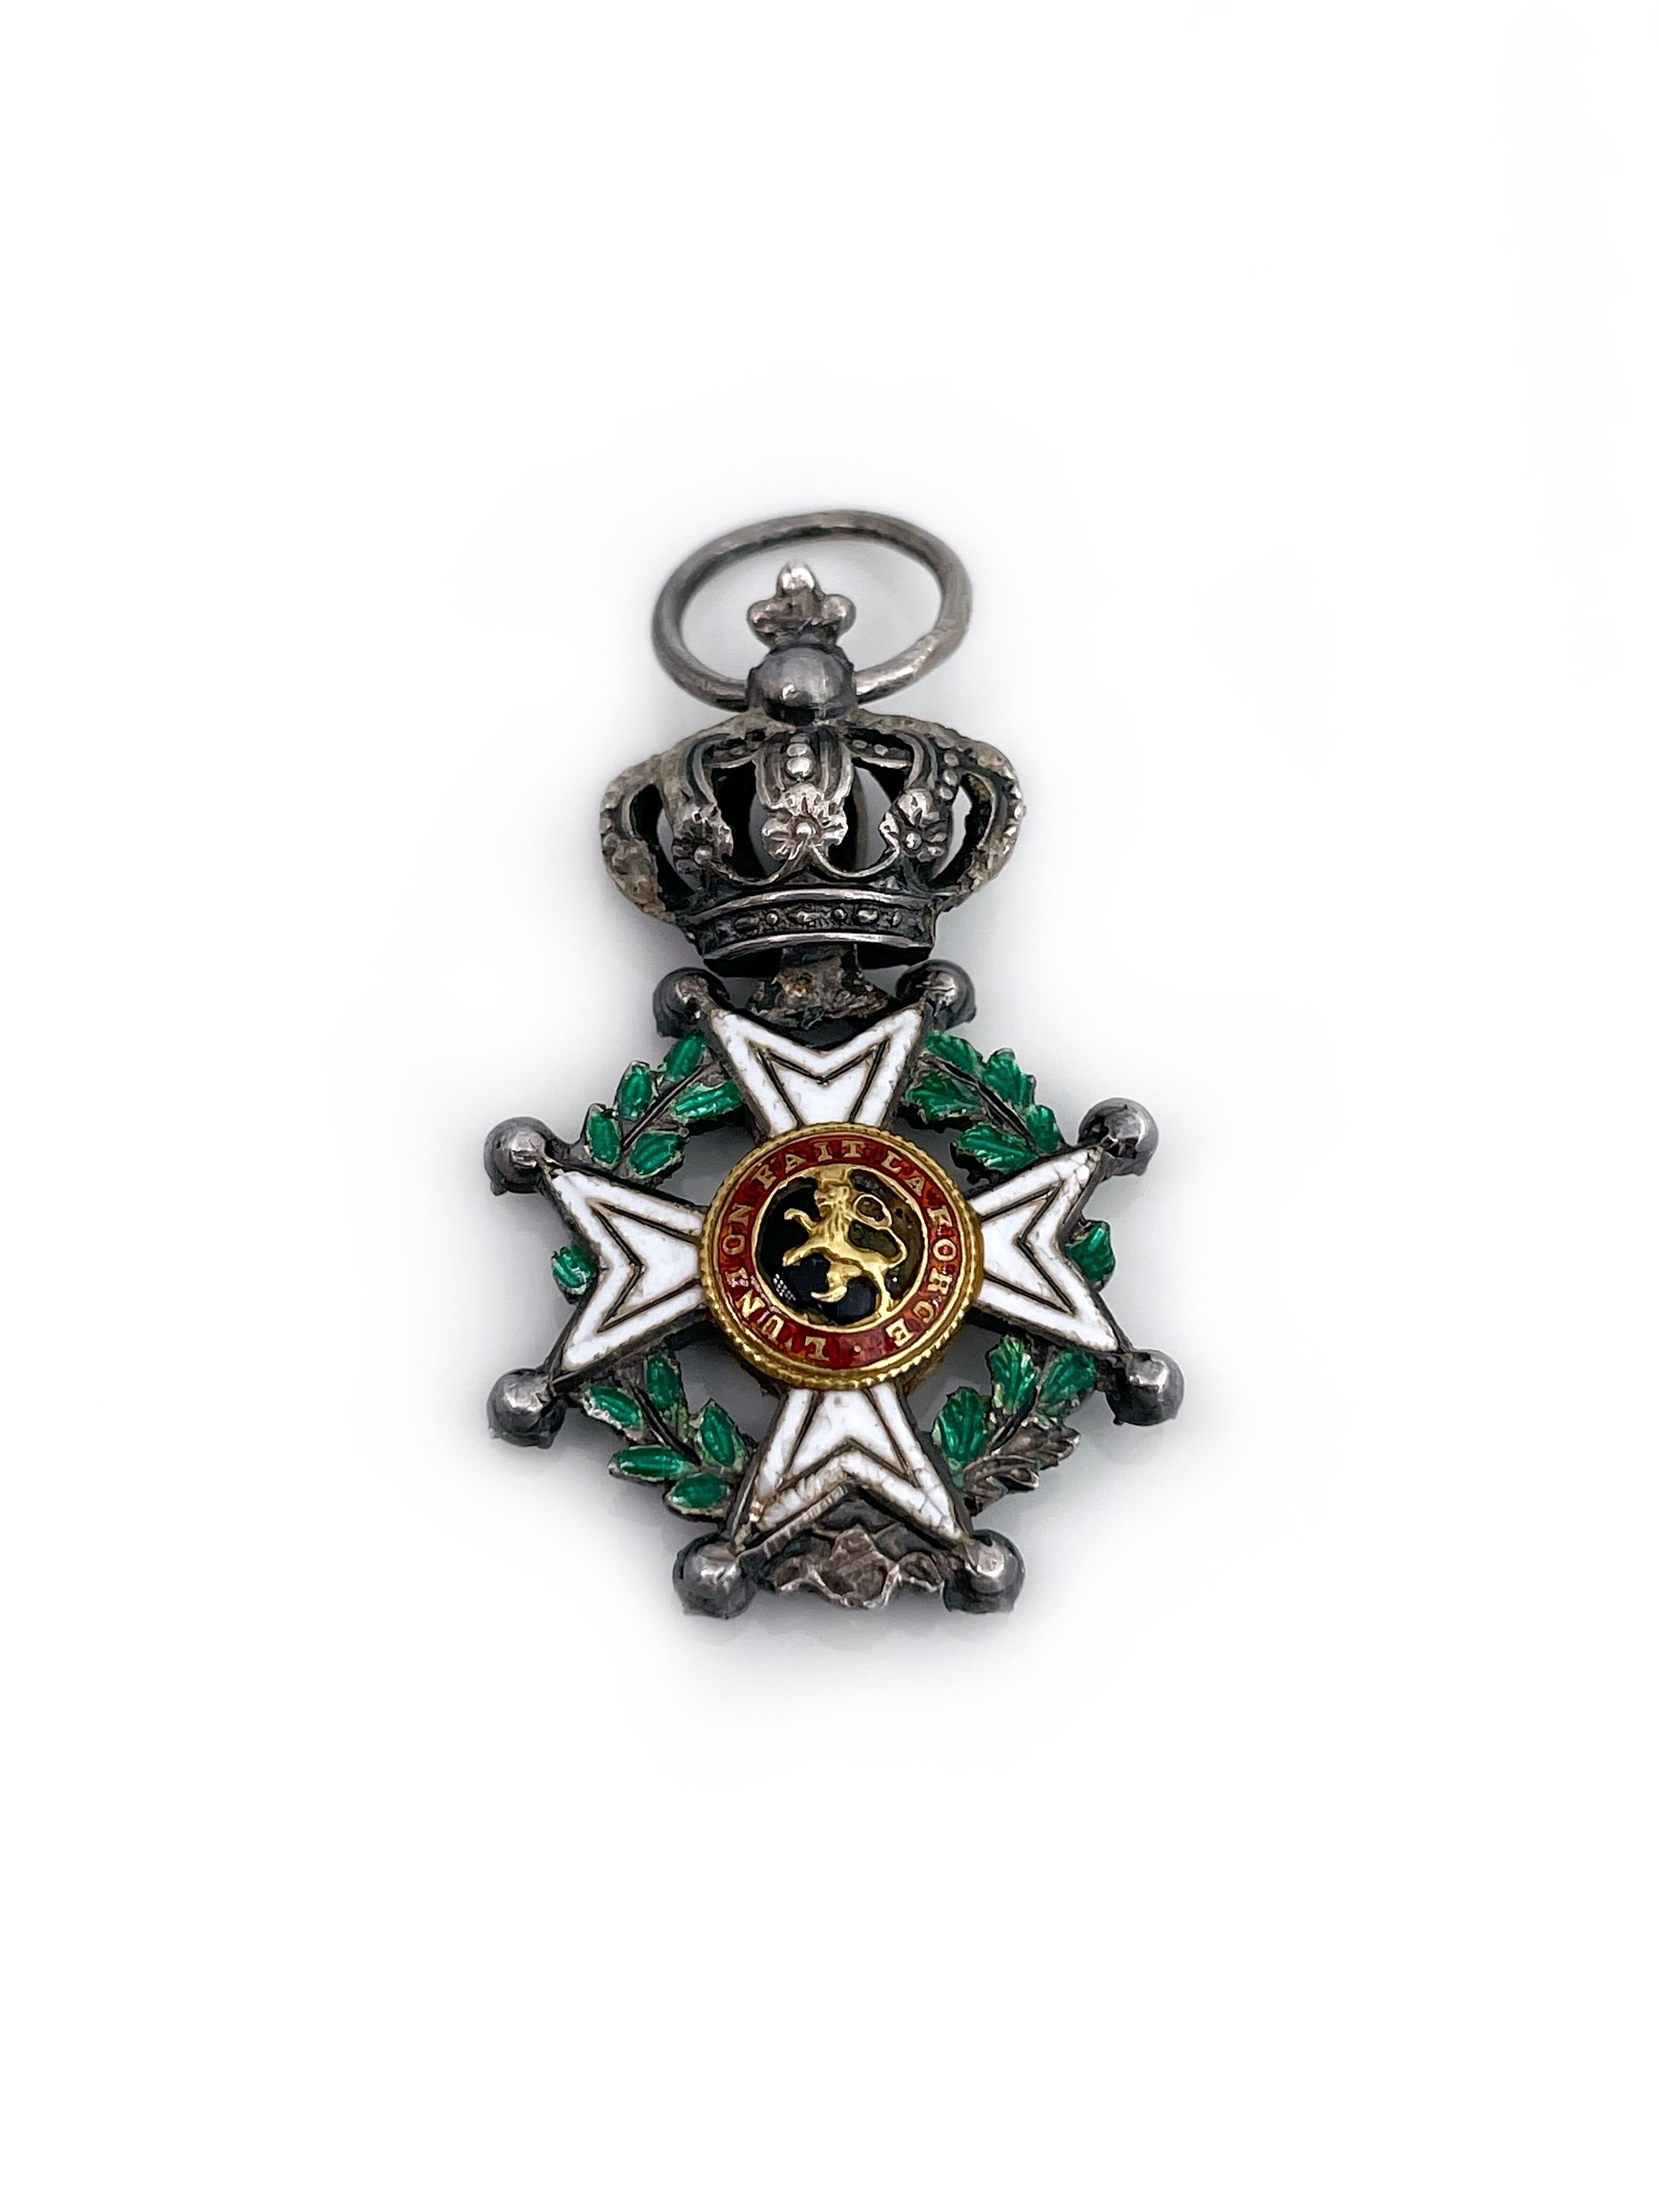 This is a medal knight order of Belgium King Leopold I given to honour a long civilian service. It is crafted in silver, adorned with enamel (average condition) and rose cut diamonds. The piece depicts a Maltese cross with ball tipped finials and